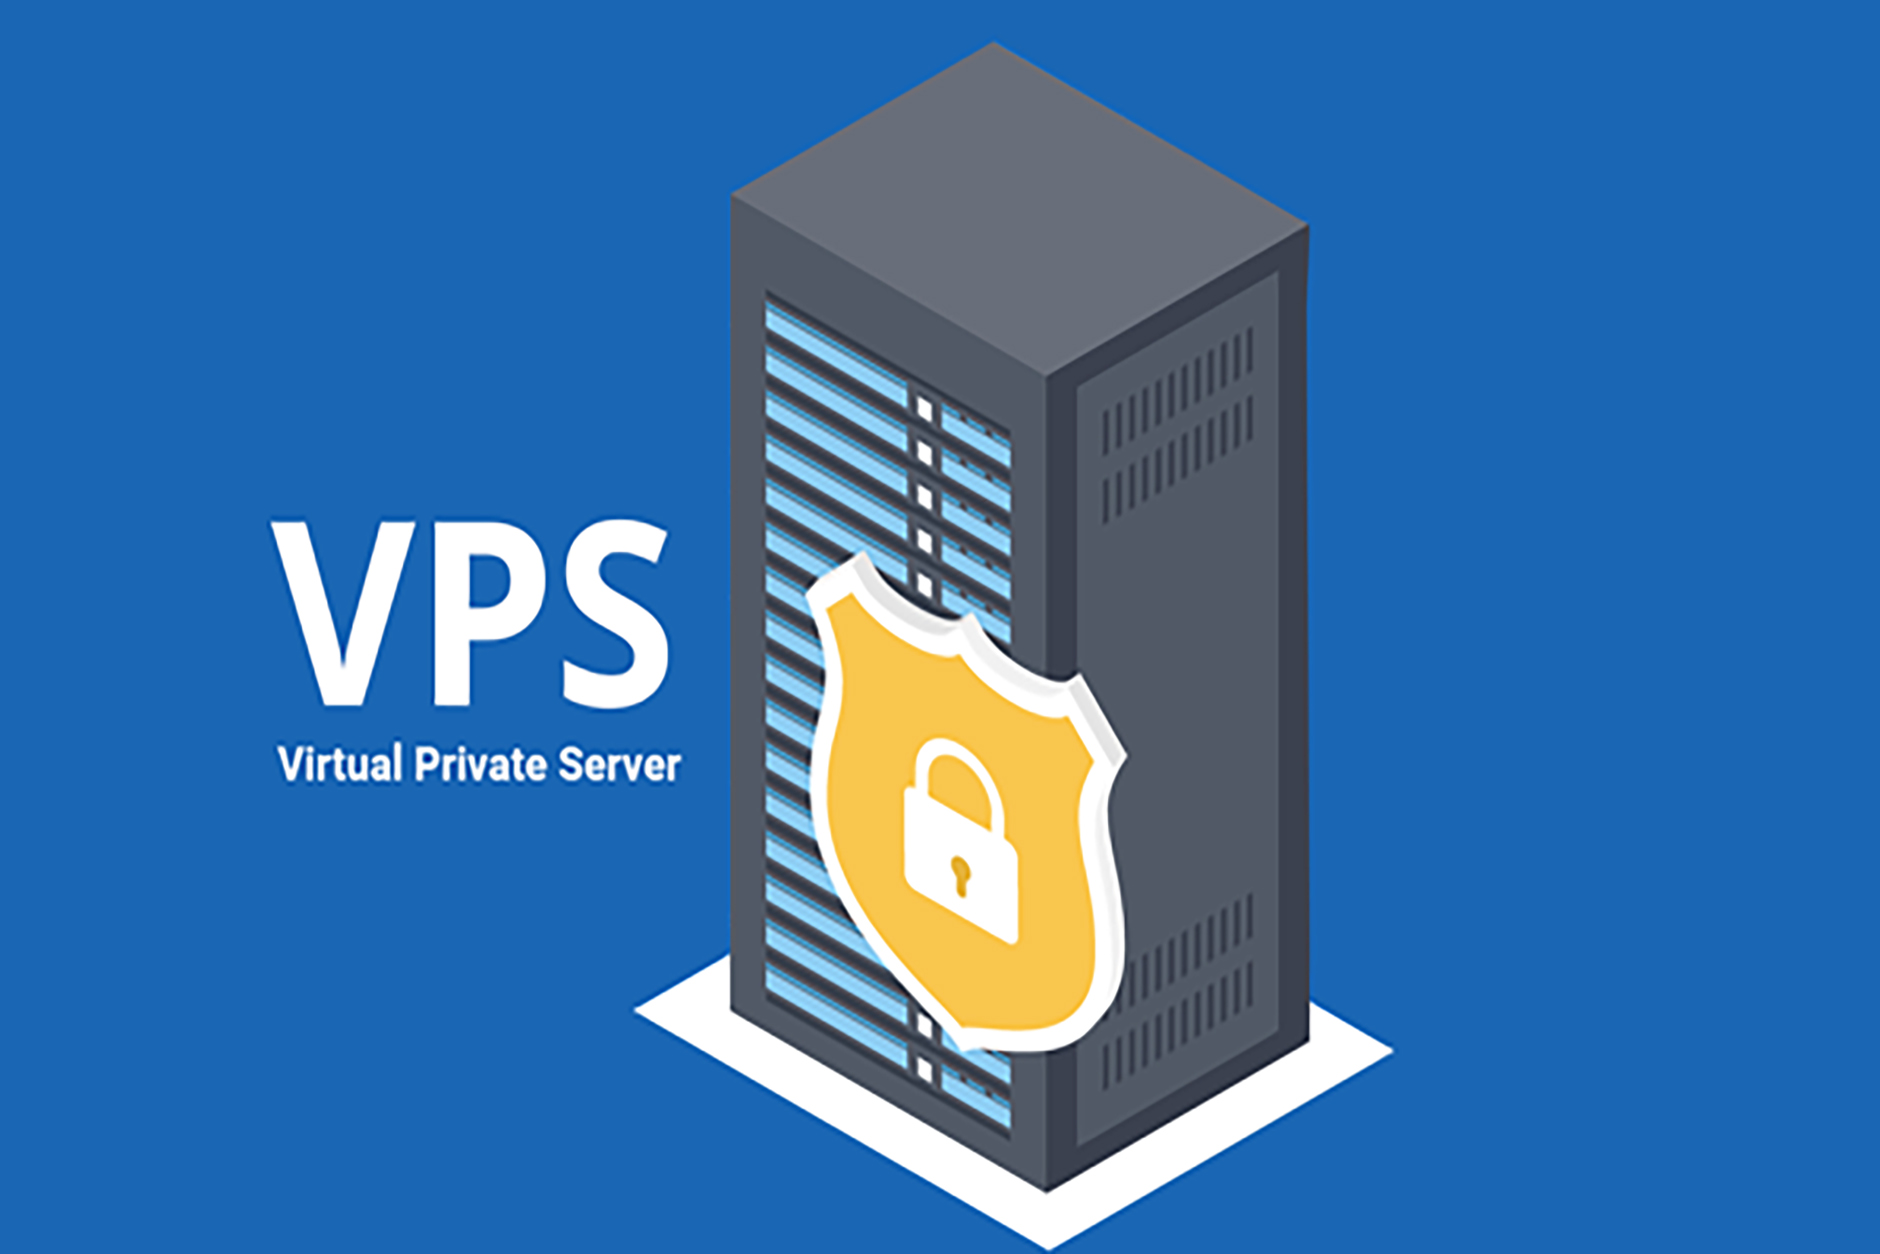 8 Things to Look for When Choosing a VPS Hosting Provider